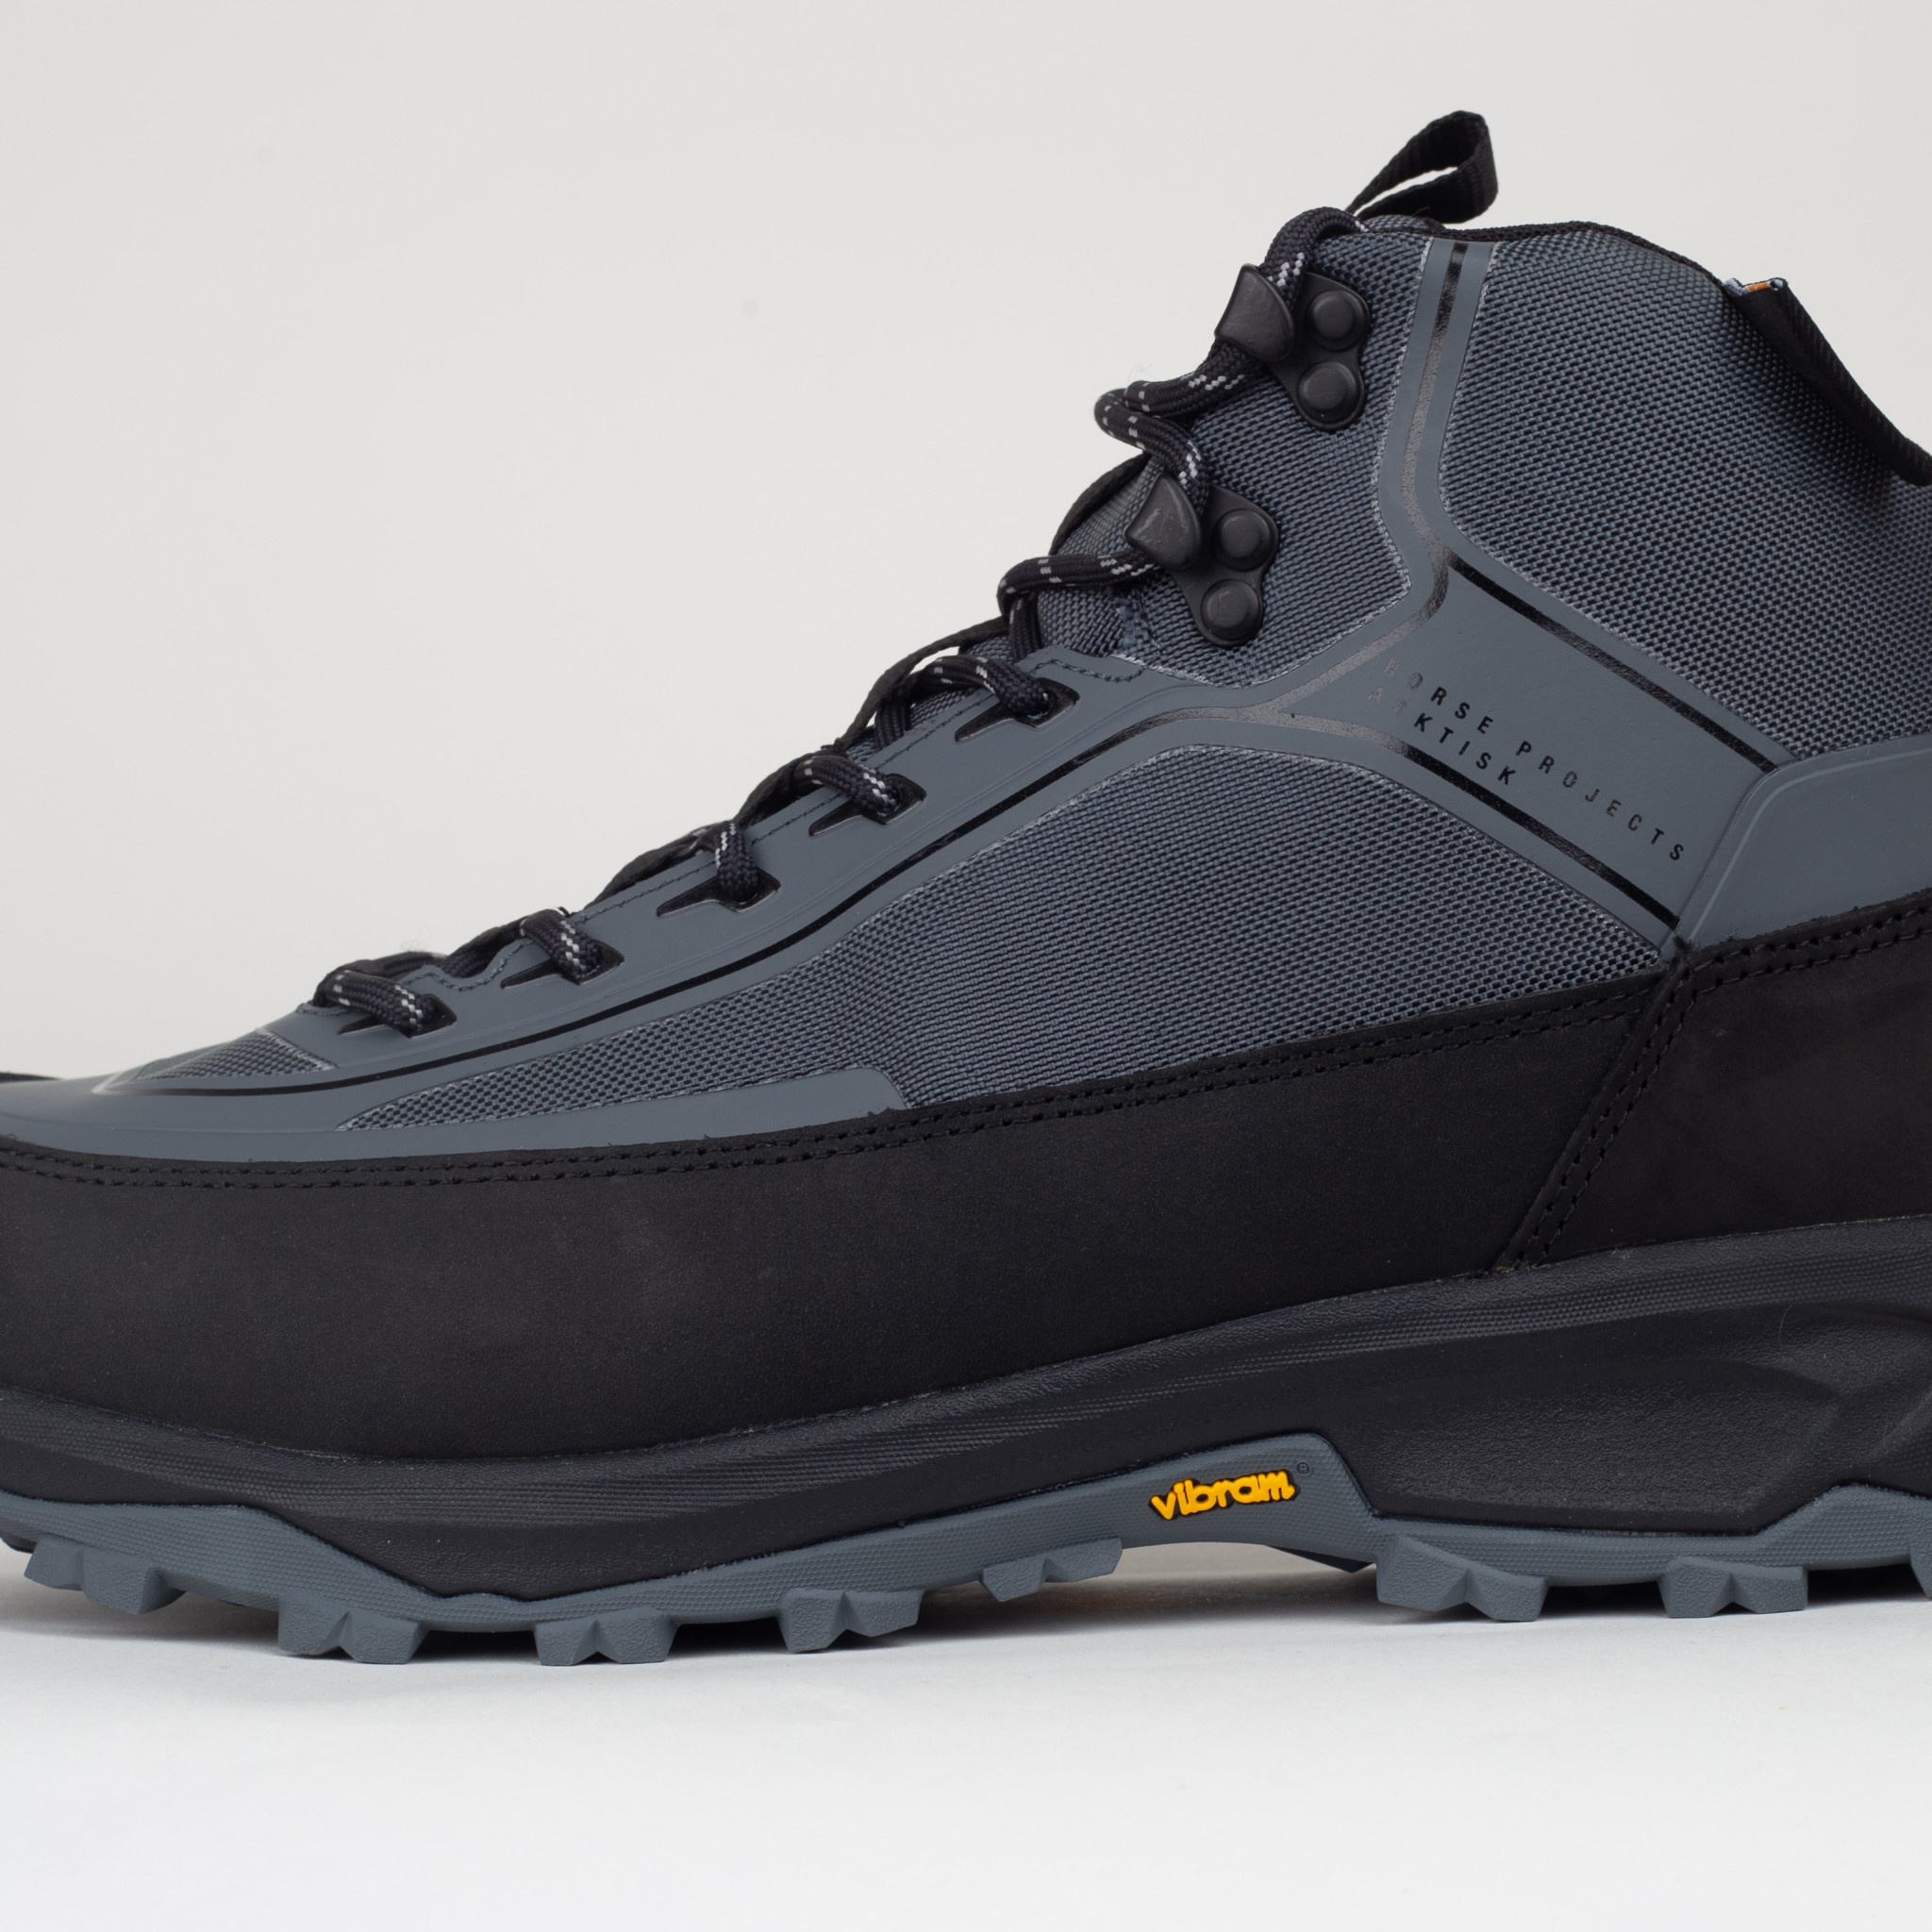 Norse Projects Arktisk Mountain Boot Dark Ice-Blue - DIV. Amsterdam